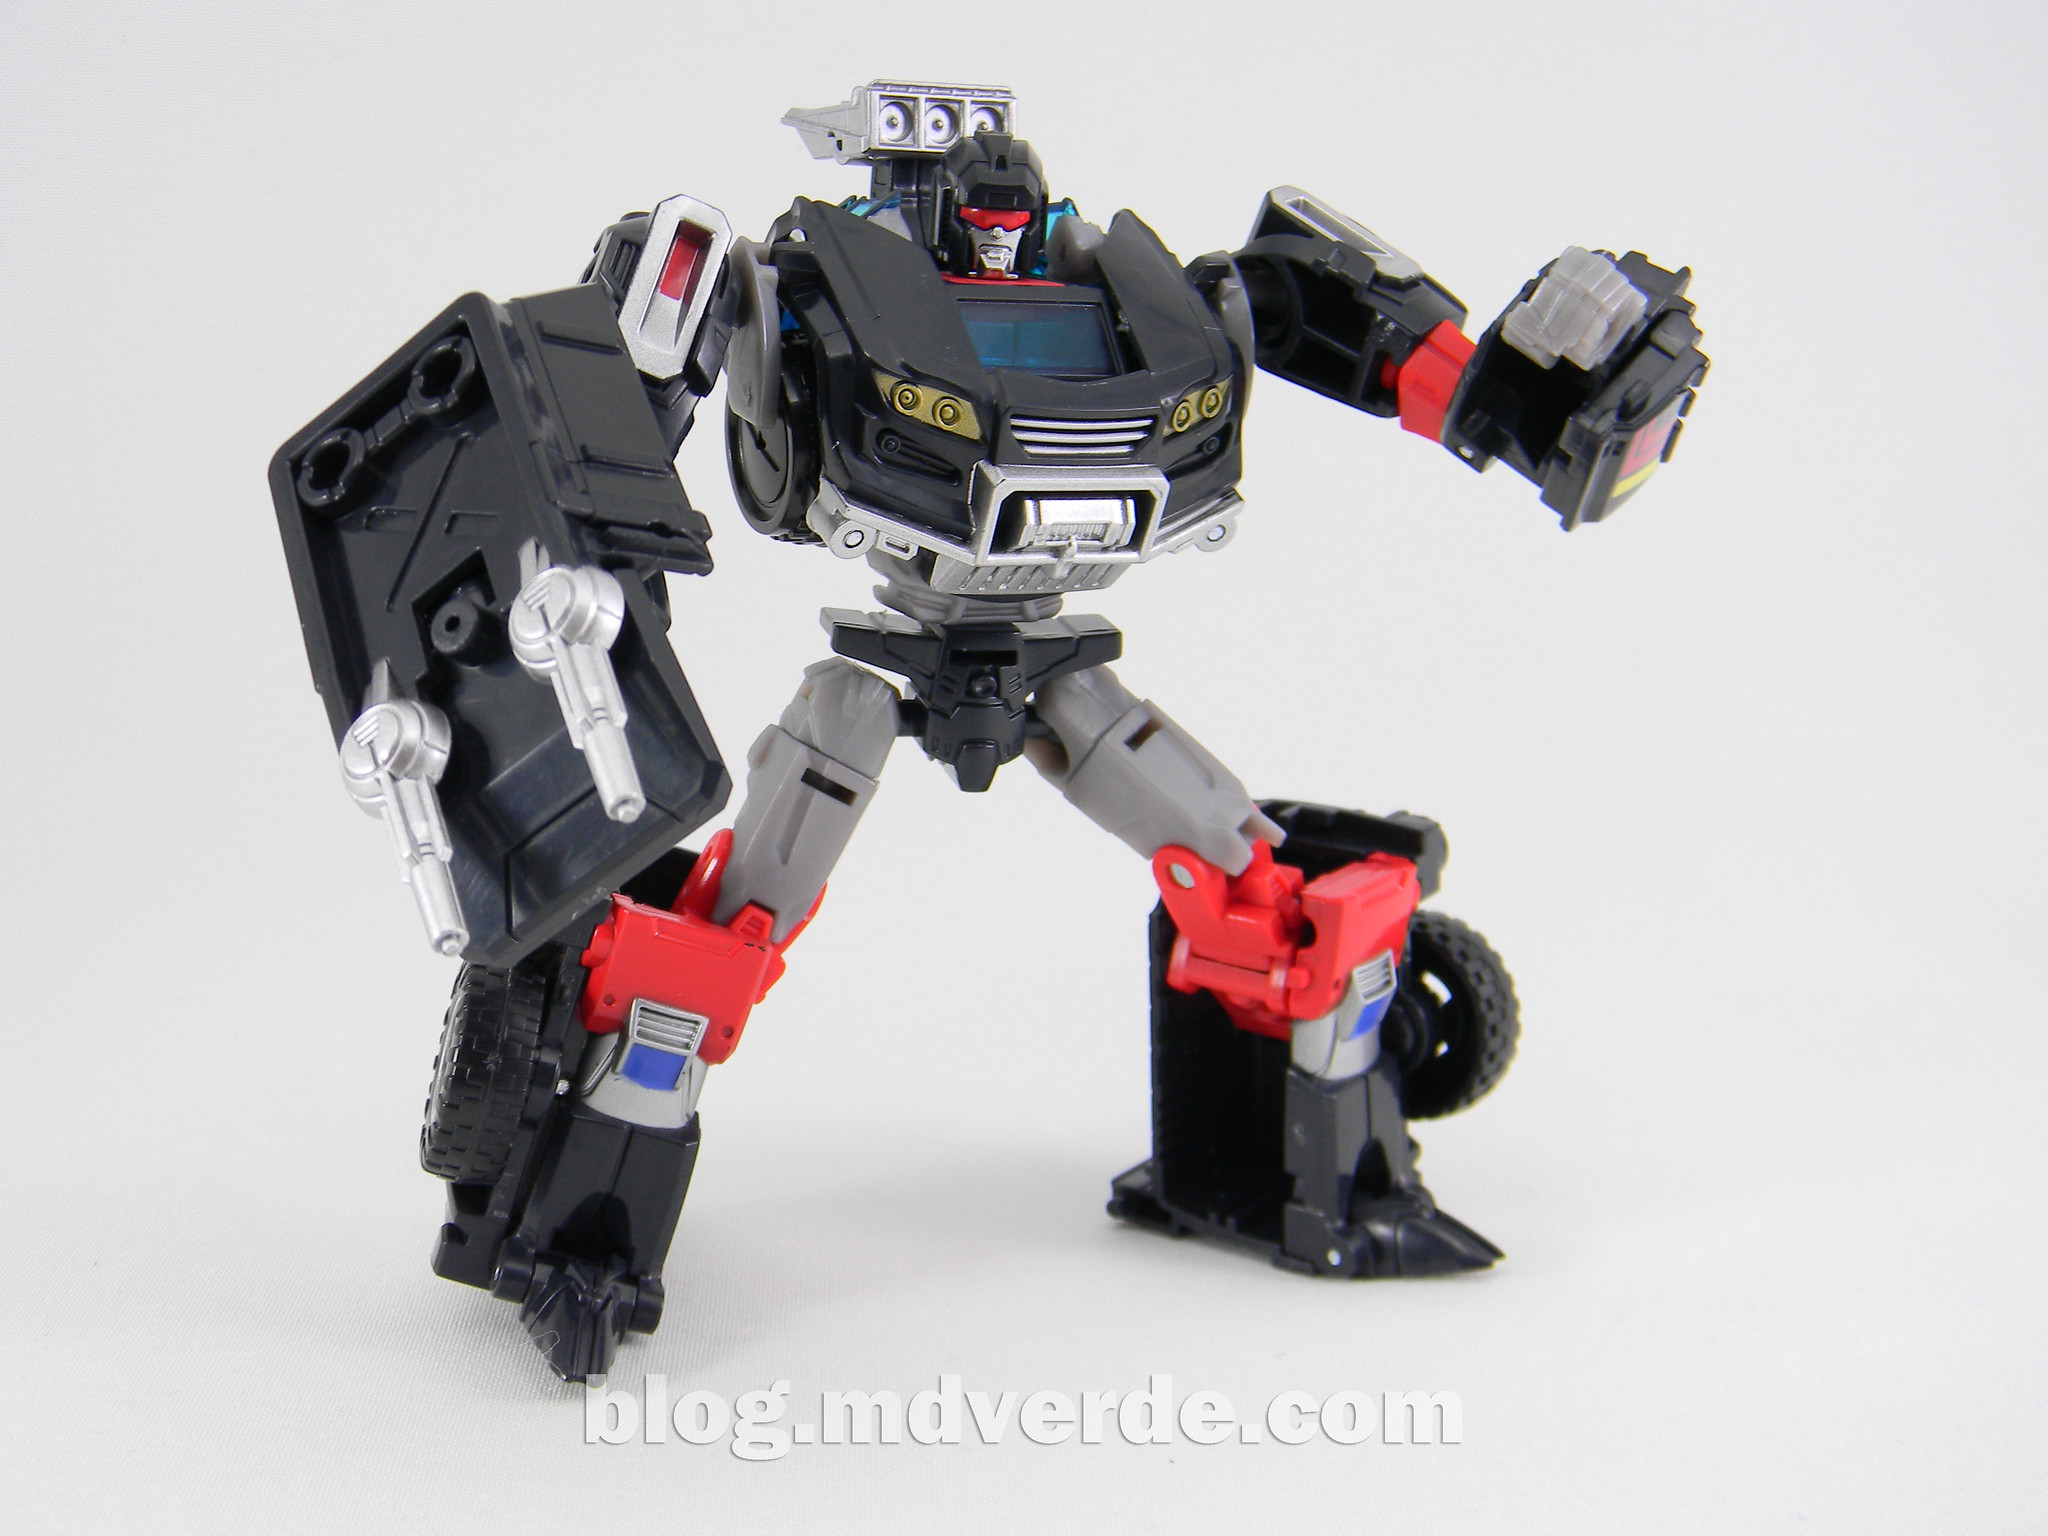 Trailbreaker with a roof/battle shield in his right arm